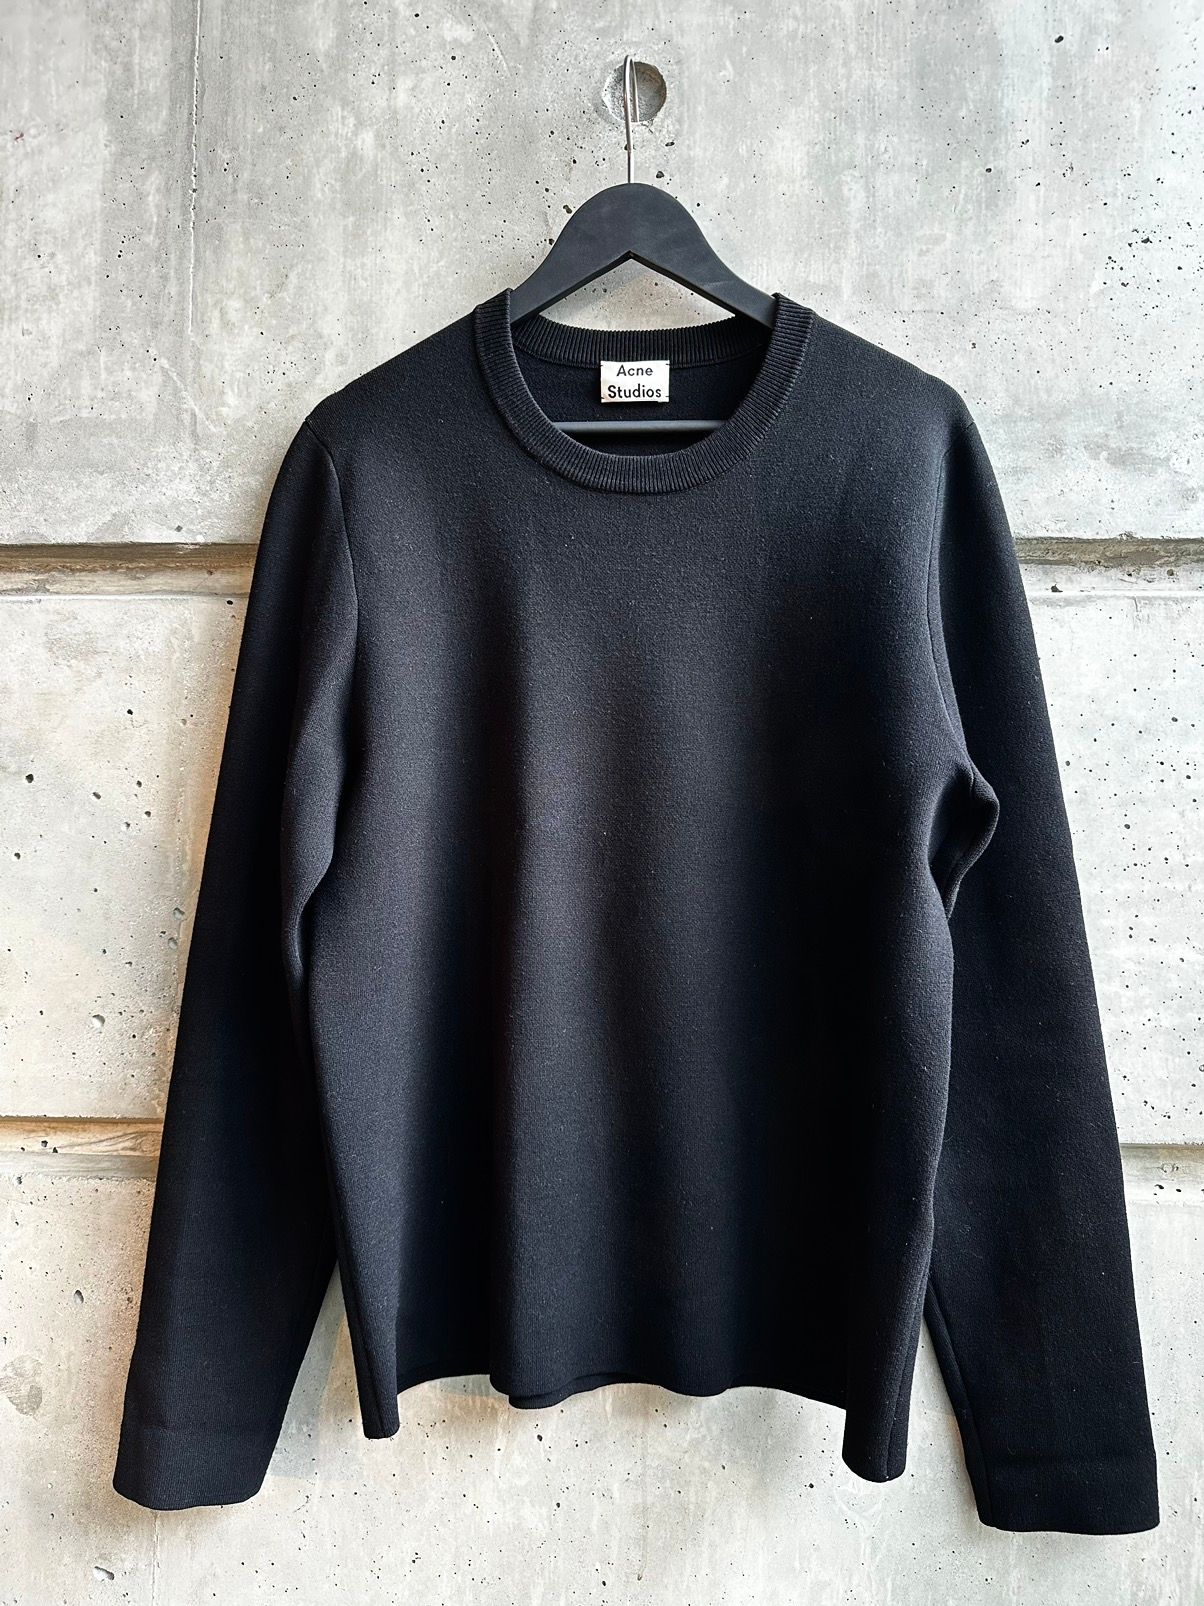 Acne Studios Acne Lang Paw sweater | Grailed